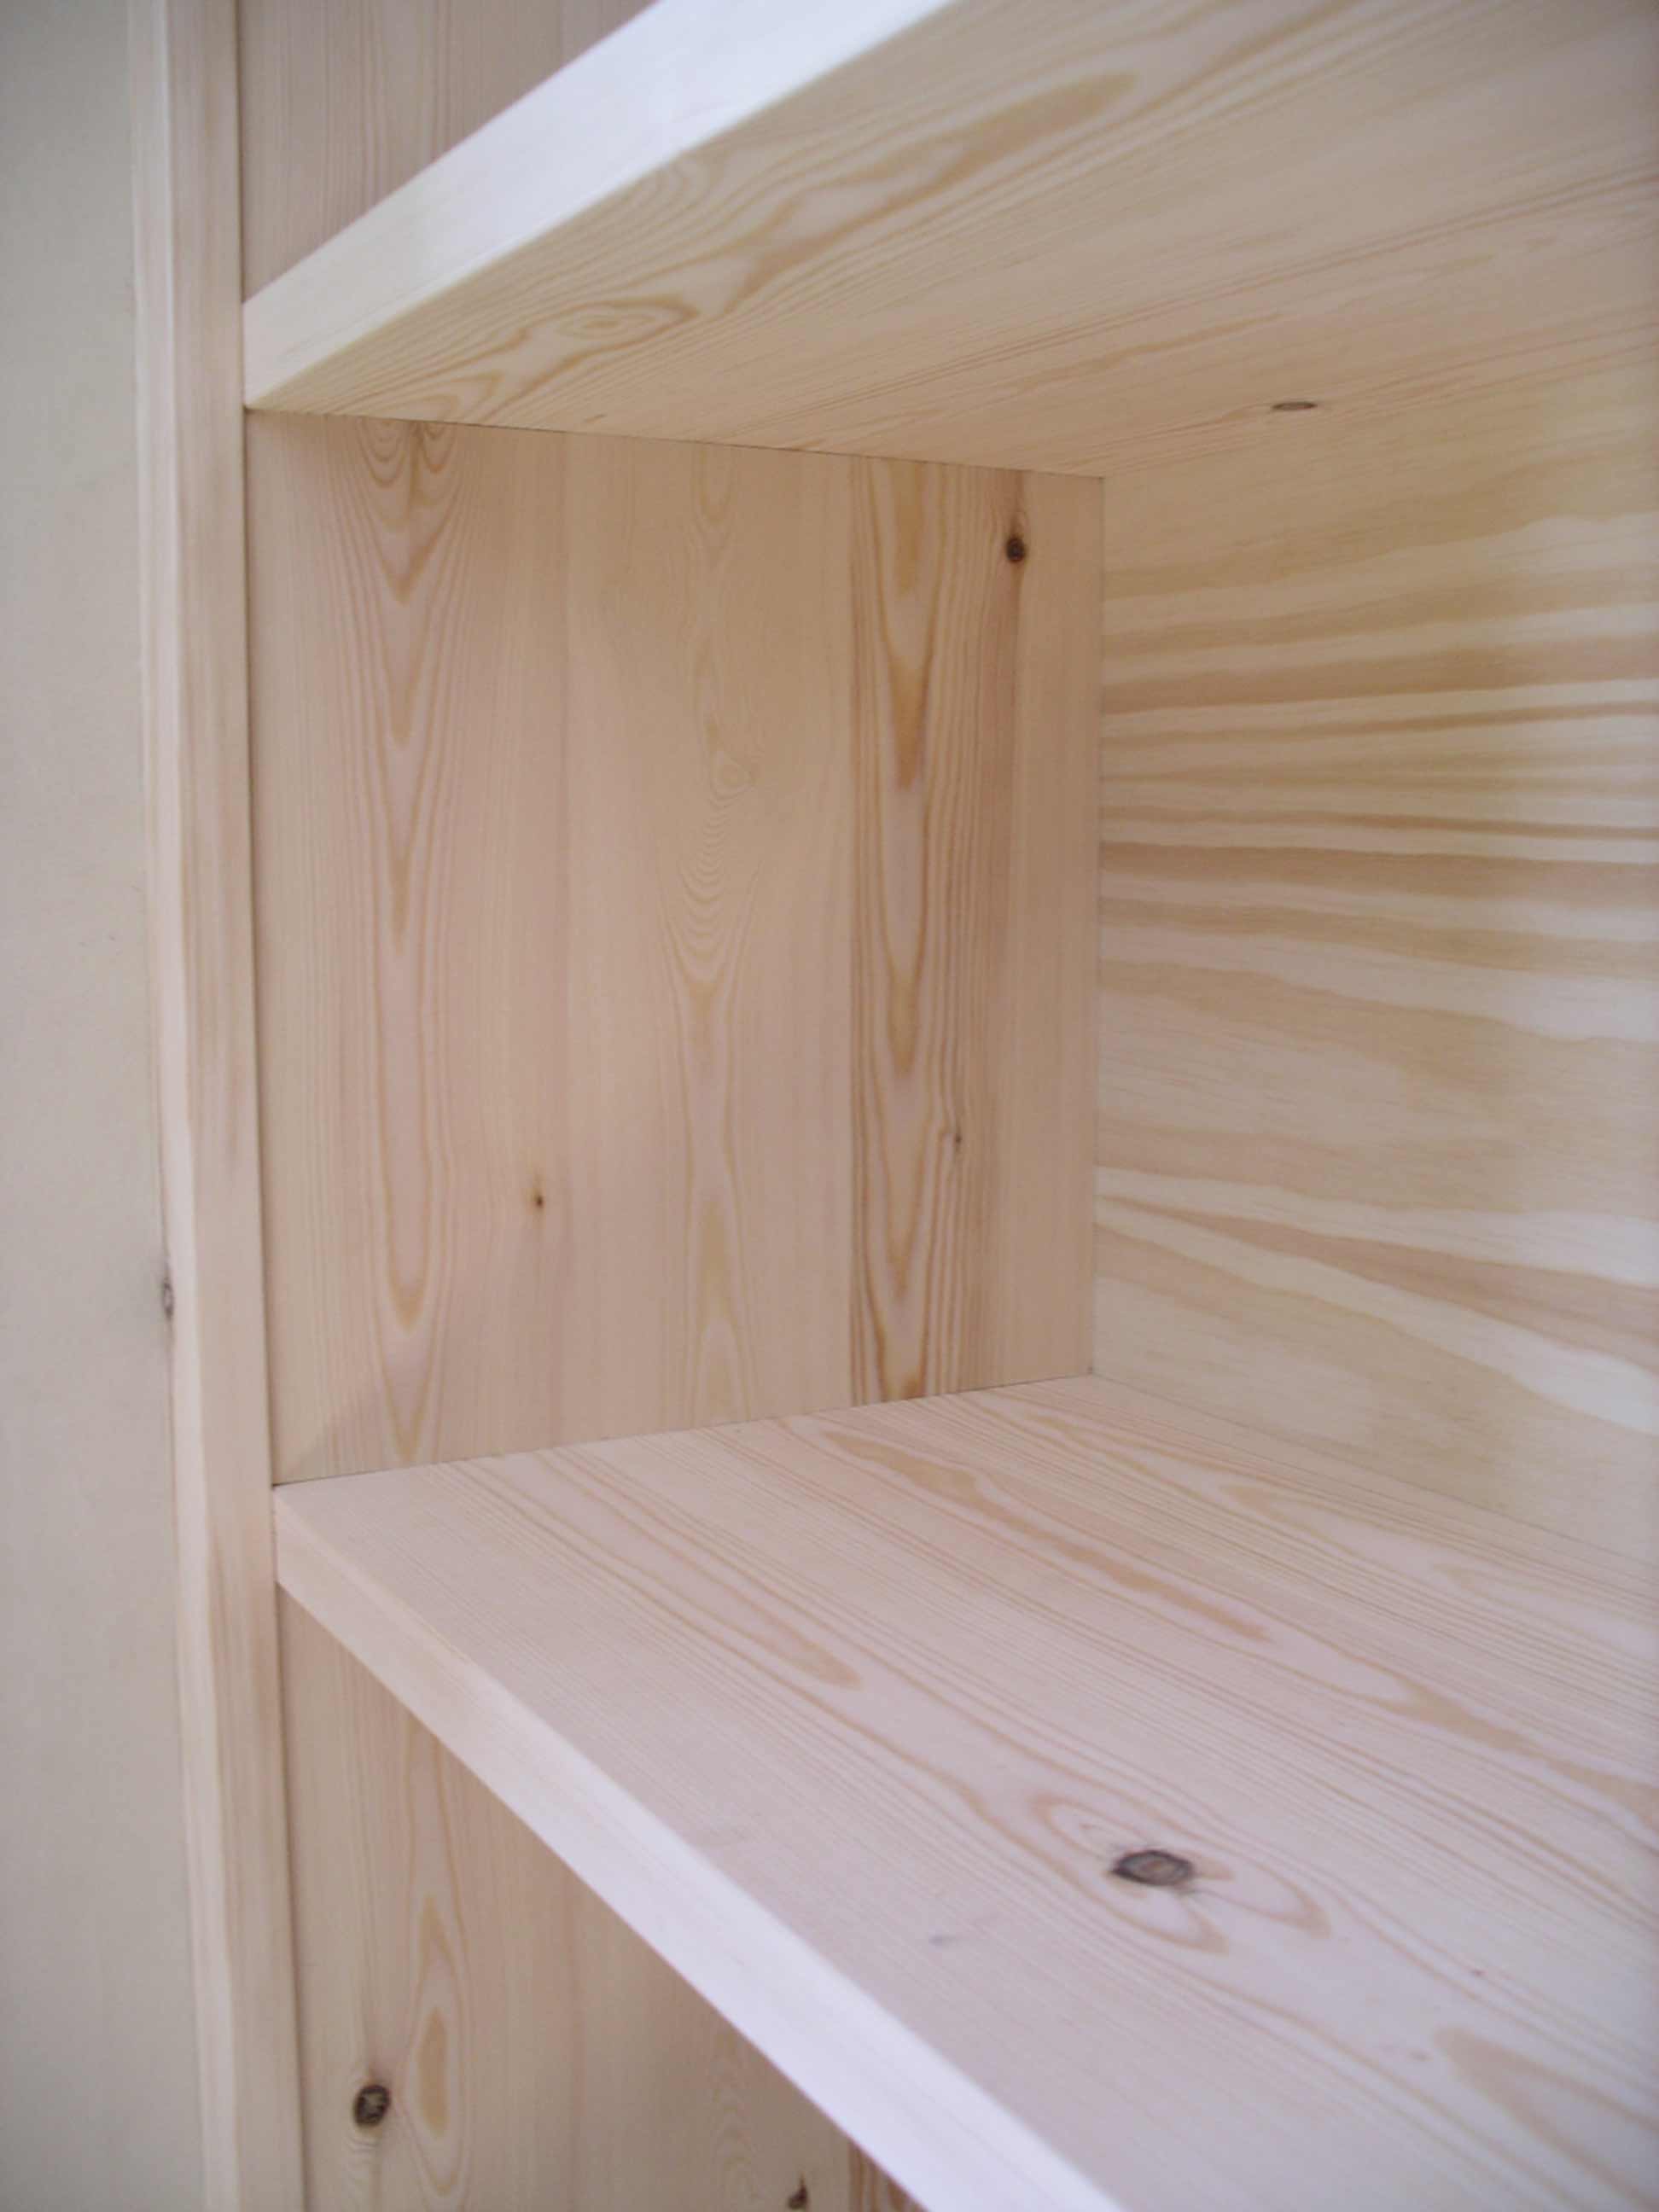 shelf housed into groove in the bookcase side